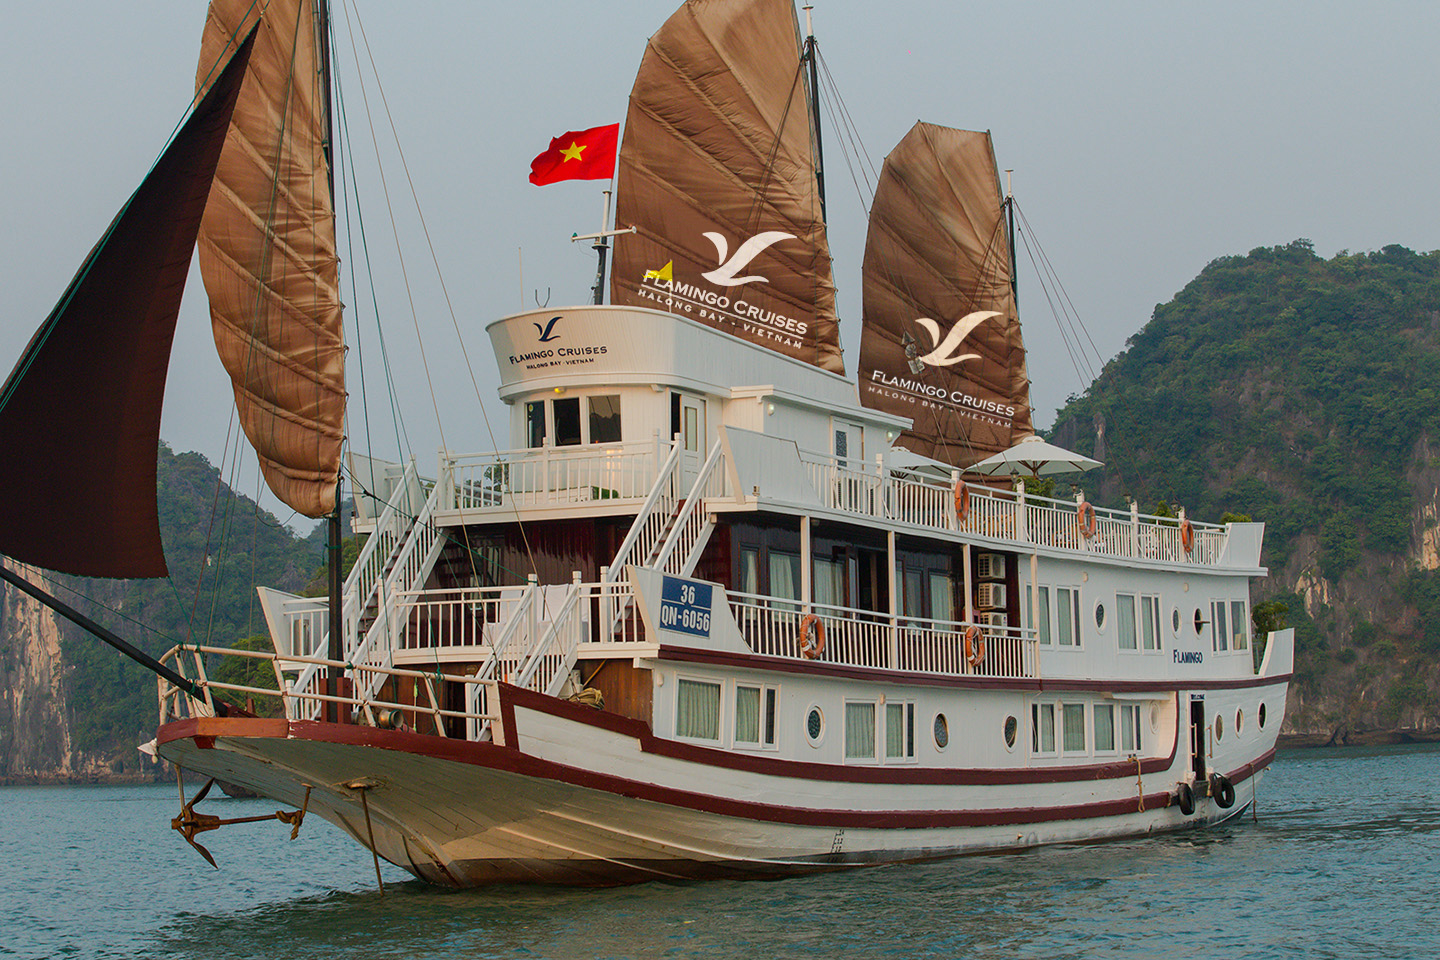 FLAMINGO CRUISES 2 DAYS 1 NIGHT & 3 DAYS 2 NIGHTS from 165 USD/person only